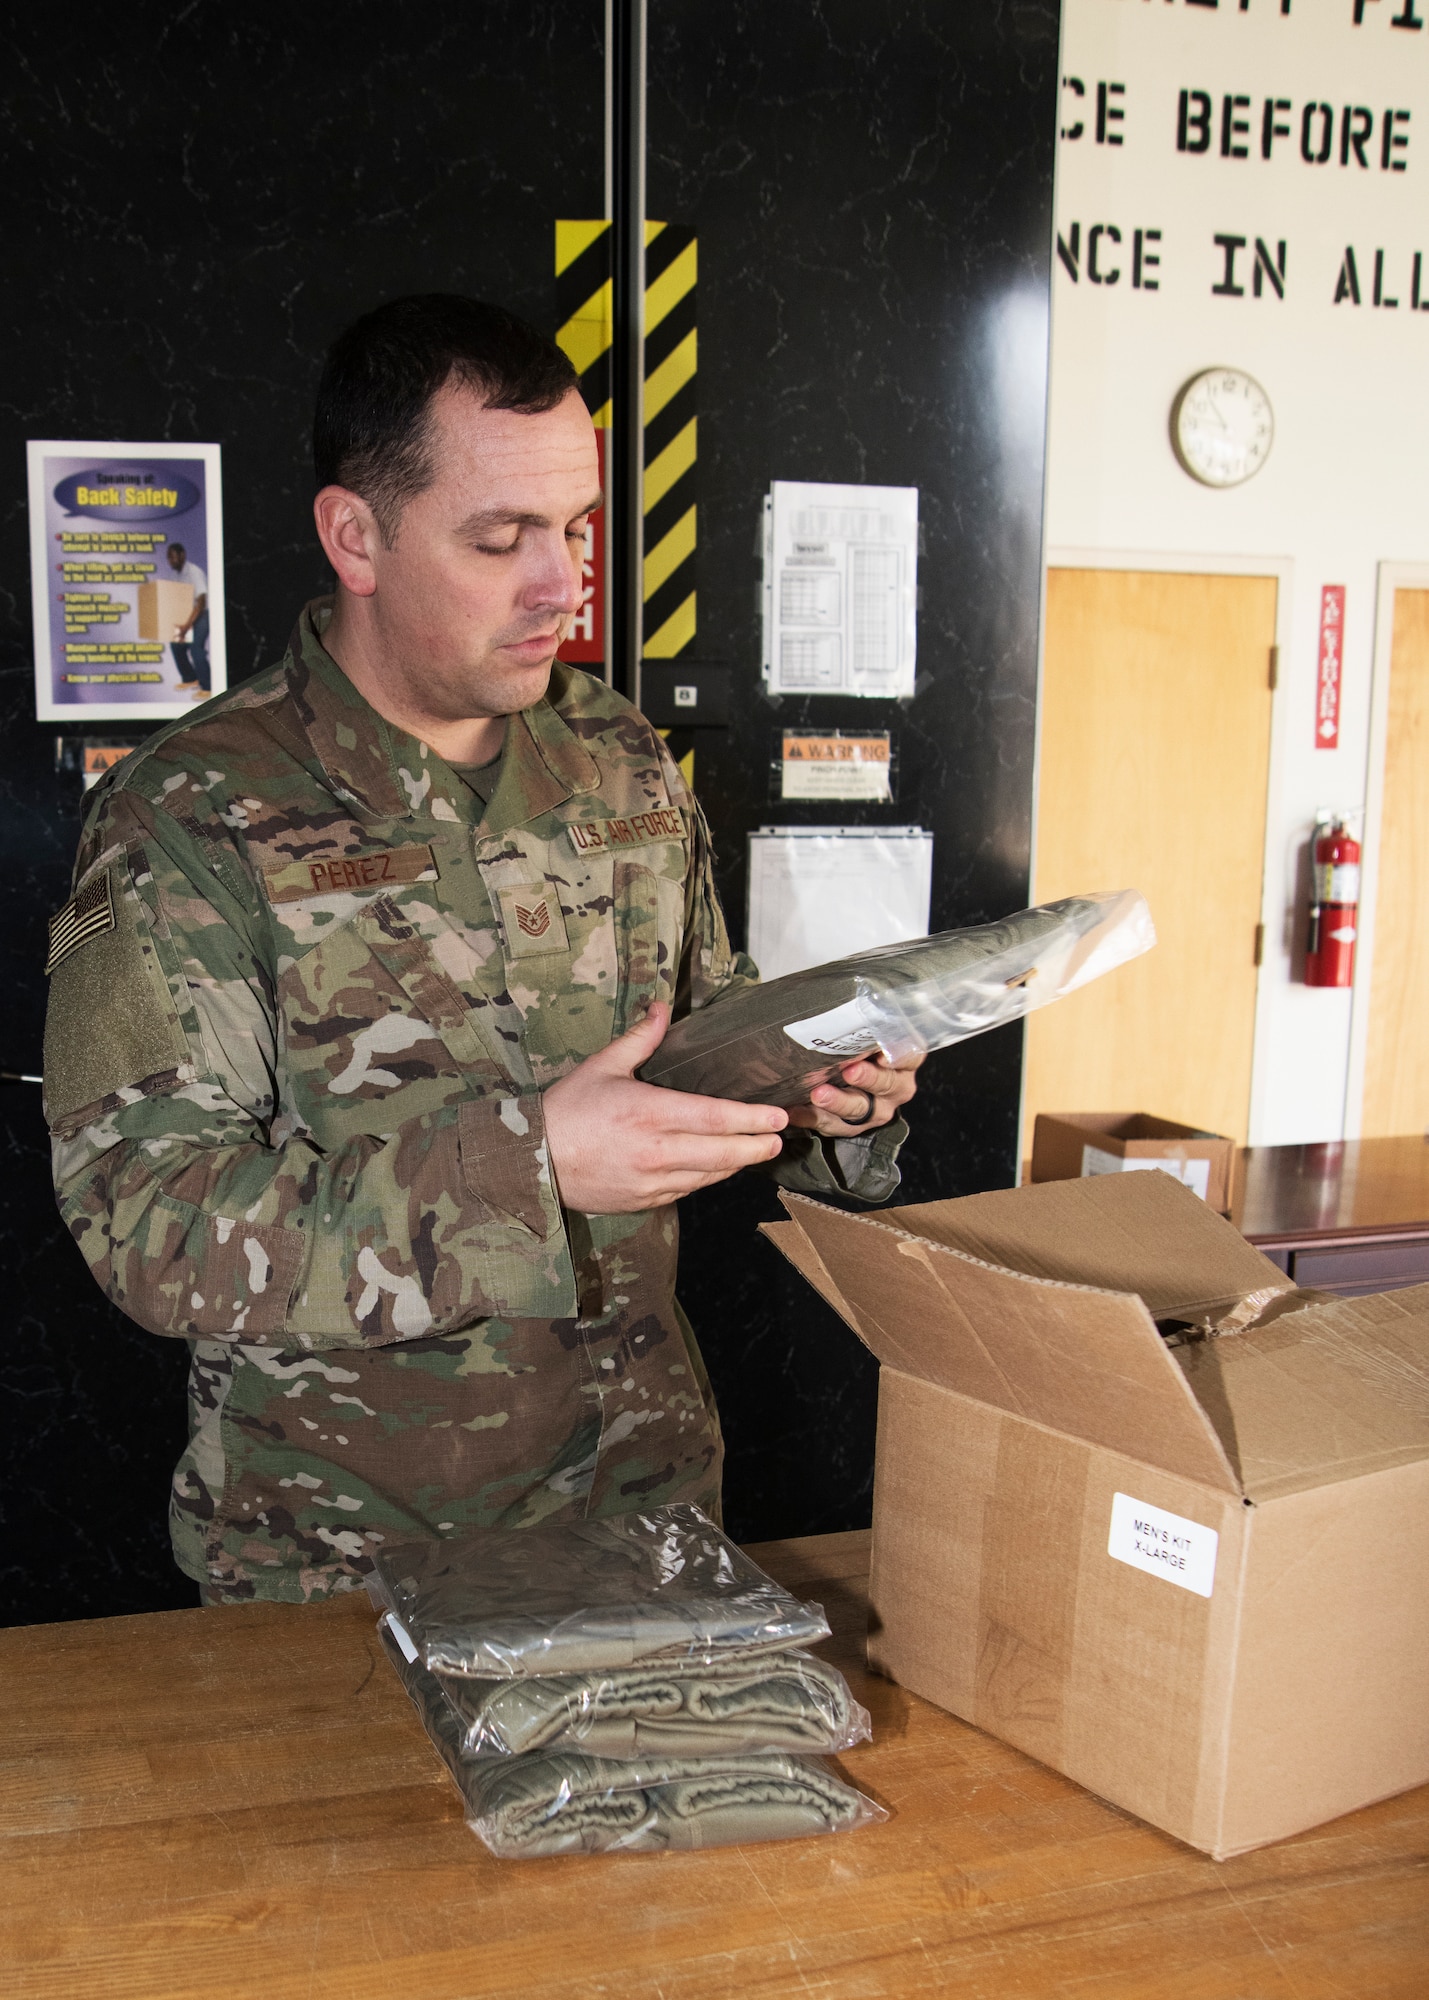 Tech Sgt. Michael Perez, 459th Security Forces Squadron, assistant Non-Commissioned Officer in Charge of Training and Readiness, sorts through a box of uniforms Jan. 30, 2020, at Joint Base Andrews, Md. Perez recently won the Outstanding Security Forces Support Staff Non-Commissioned Officer award at the Air Force Reserve Command level. (U.S. Air Force photo/SSgt. Cierra Presentado)